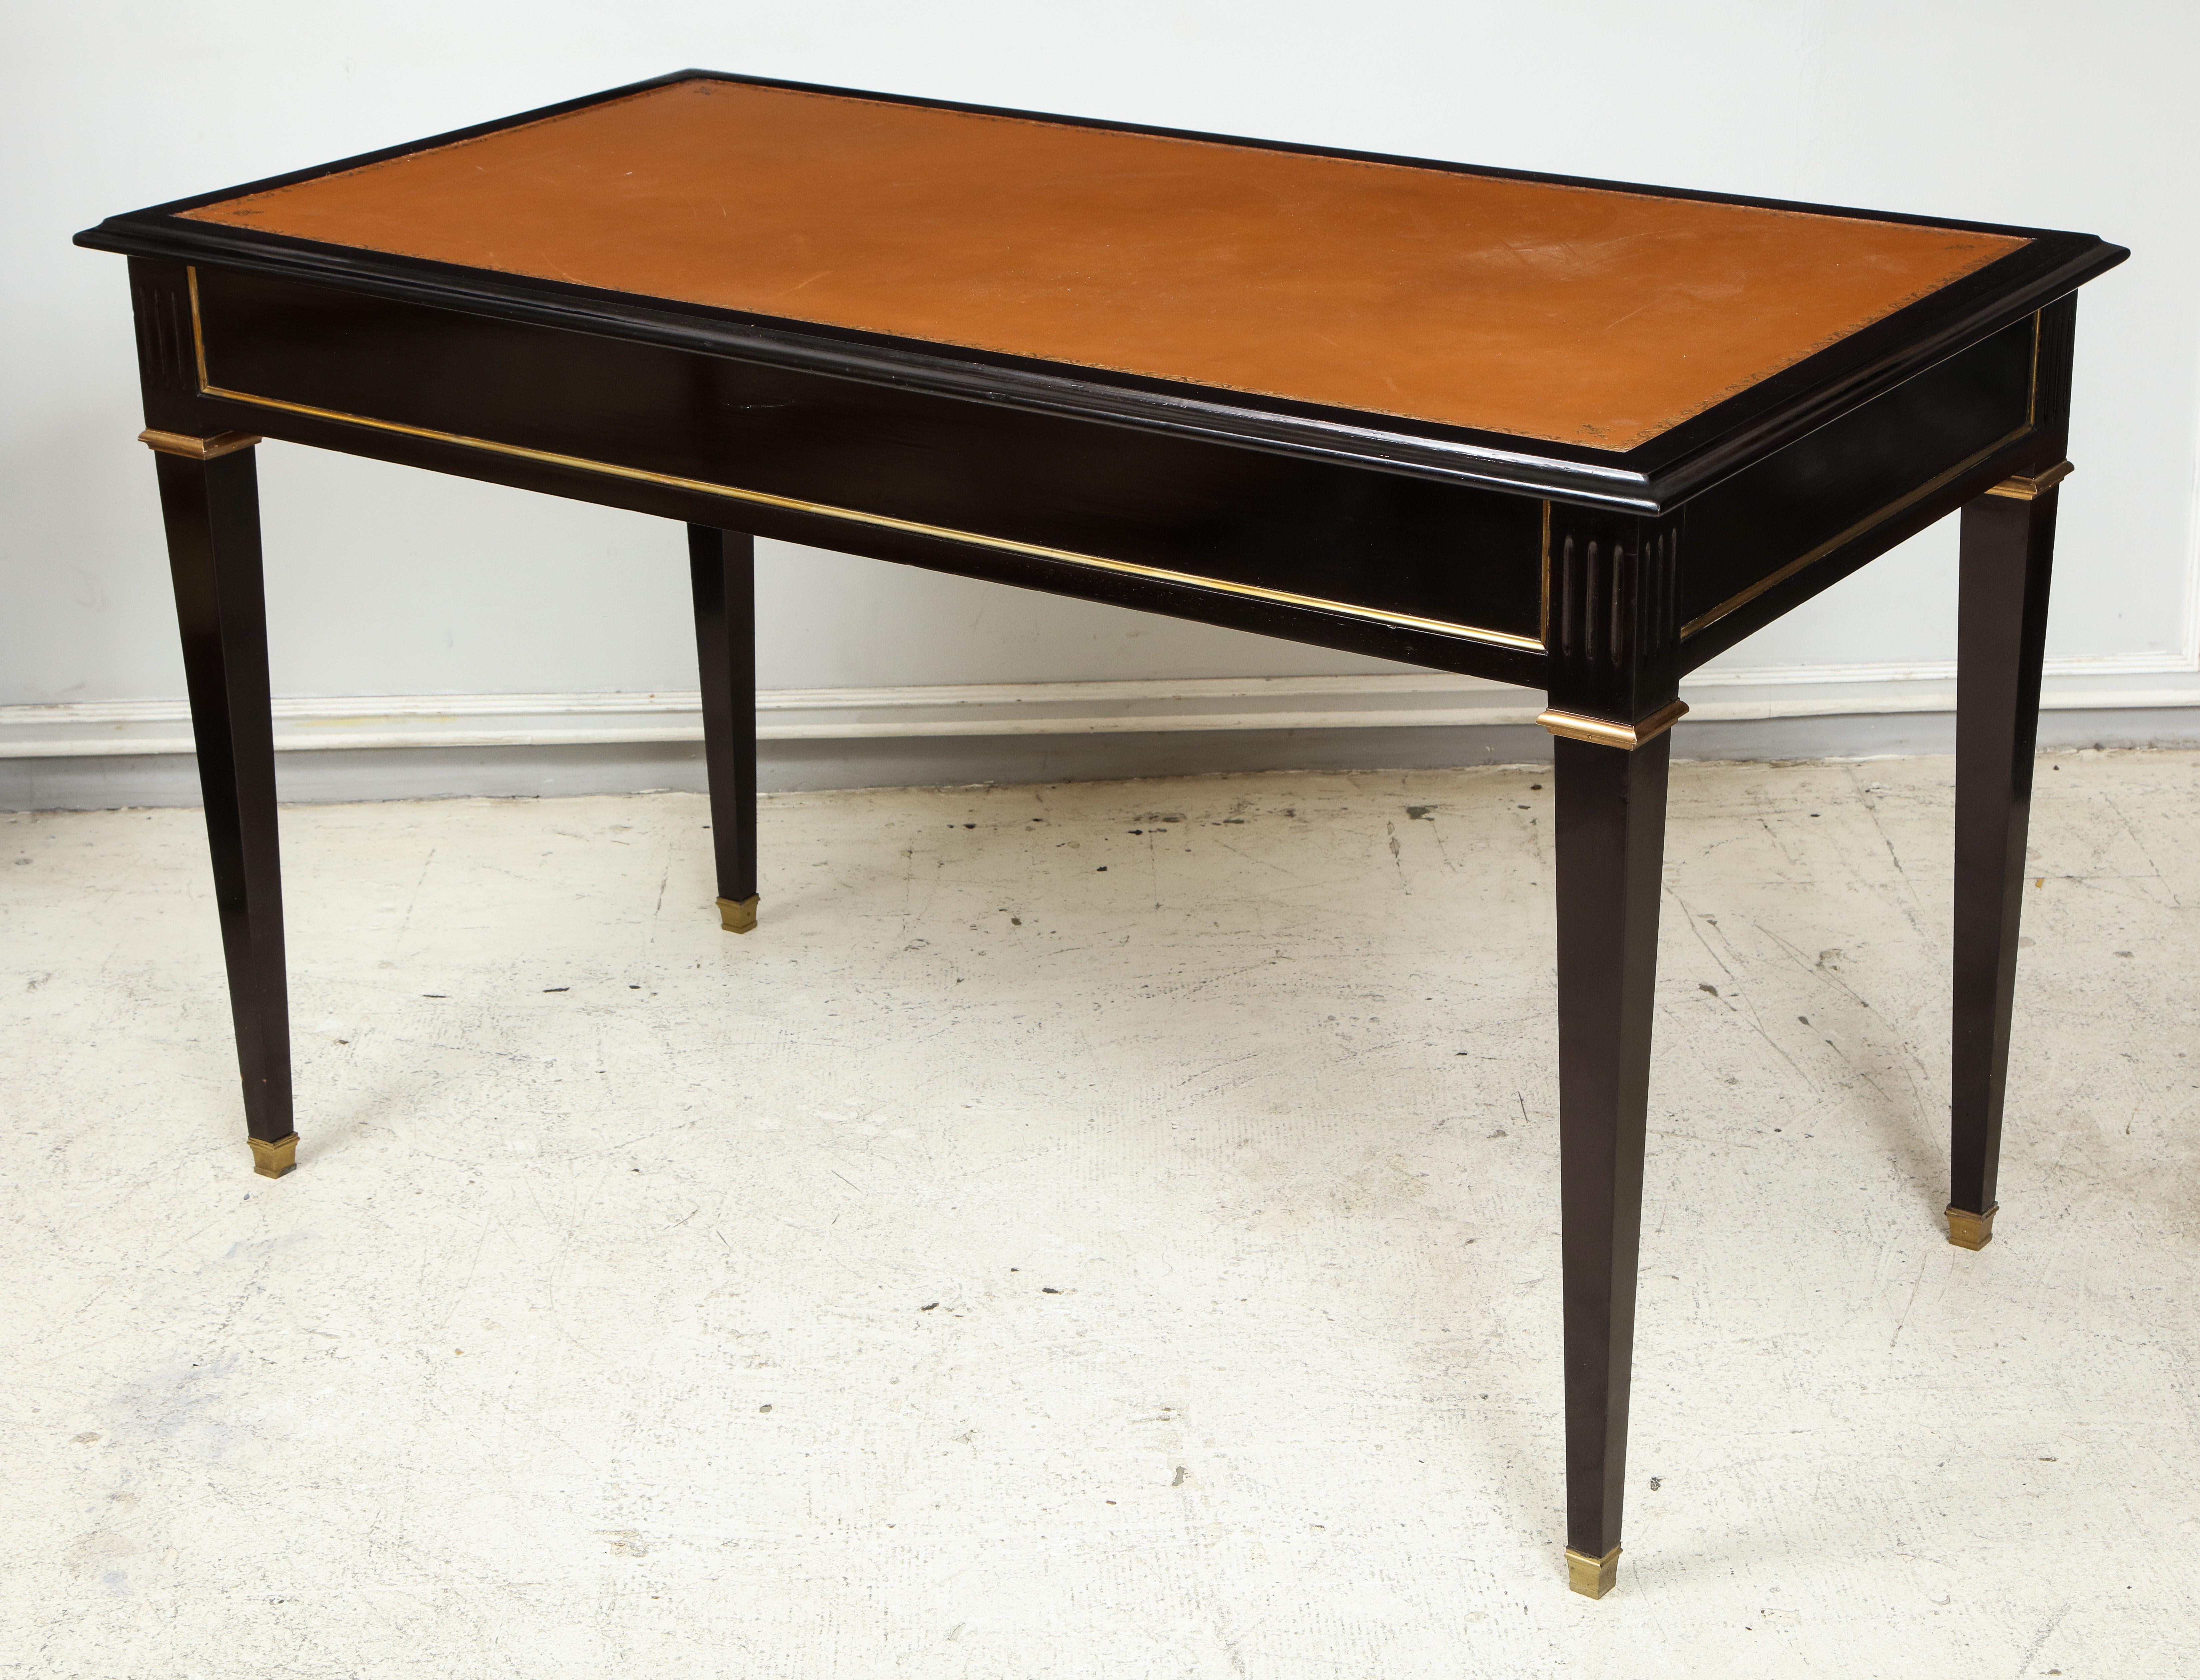 Ebonized leather-top bronze-mounted bureauplat desk on tapered legs ending in bronze sabots. This desk is finished on both sides.